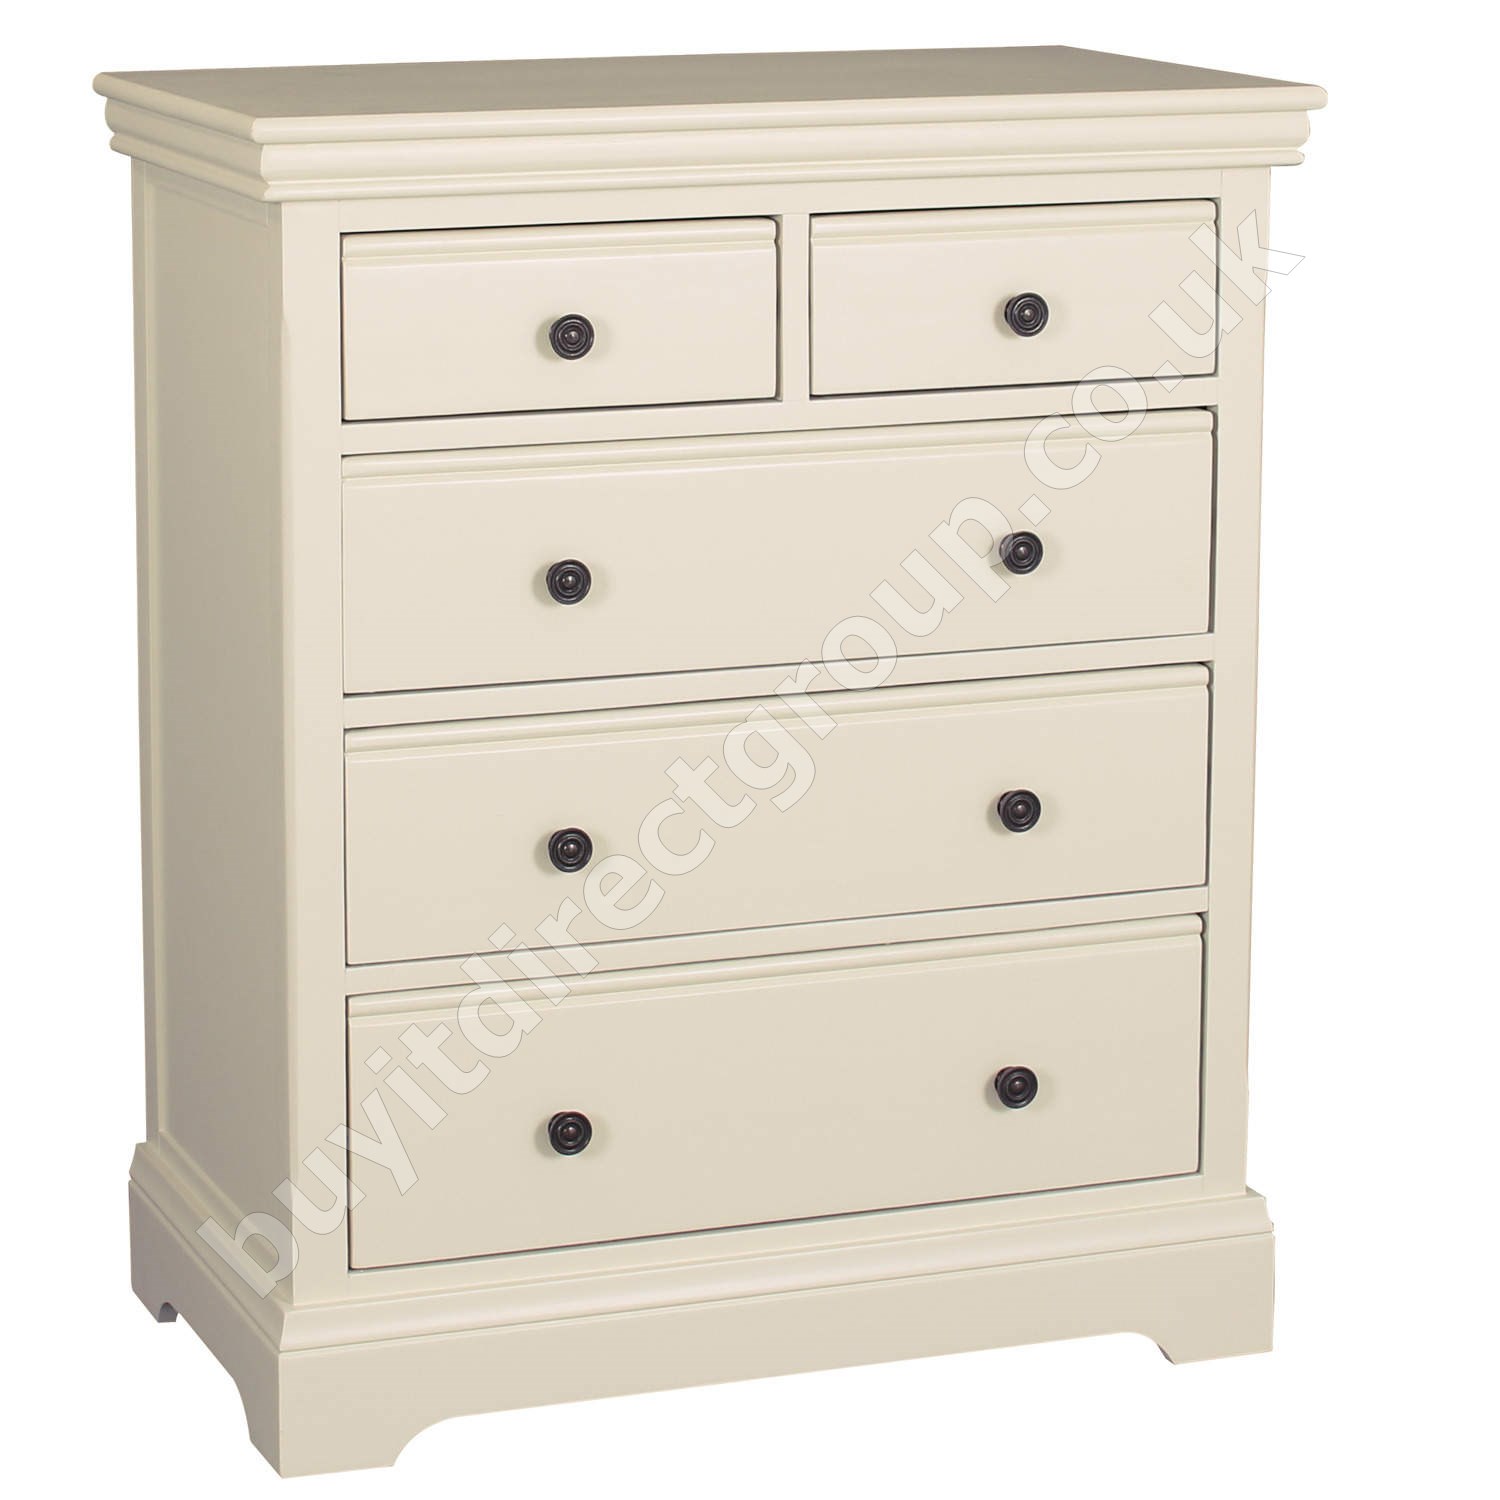 Ivory Solid Wooden 3 + 2 Drawer Chest of Drawers Bedroom Storage | eBay